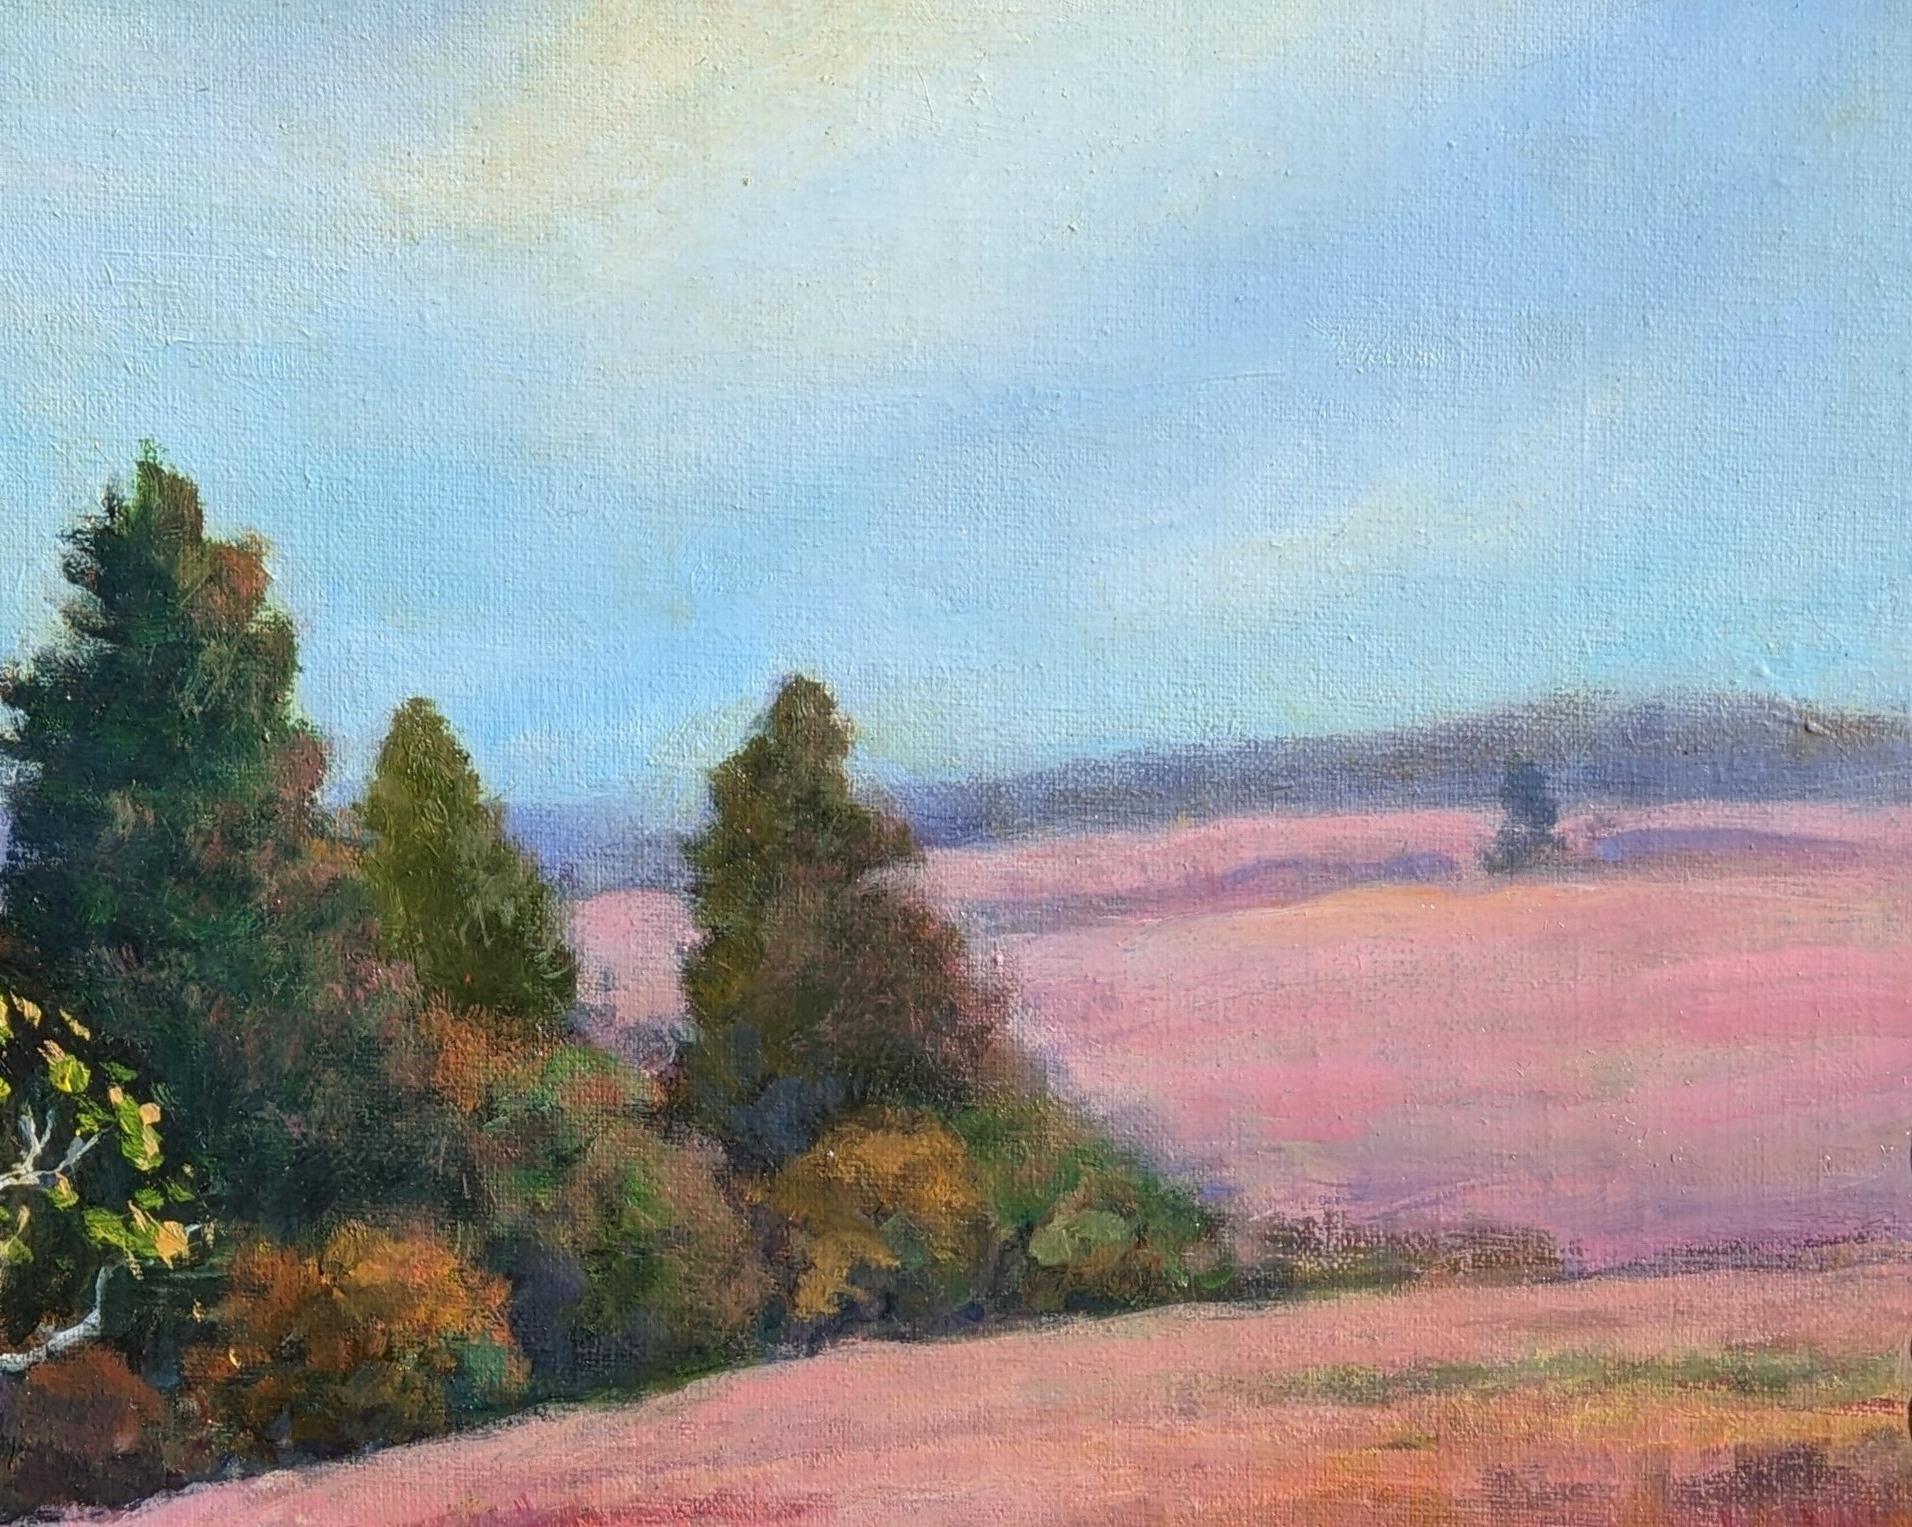 Beth Carlson's love of impressionist brush strokes is evident in this colorful landscape, 